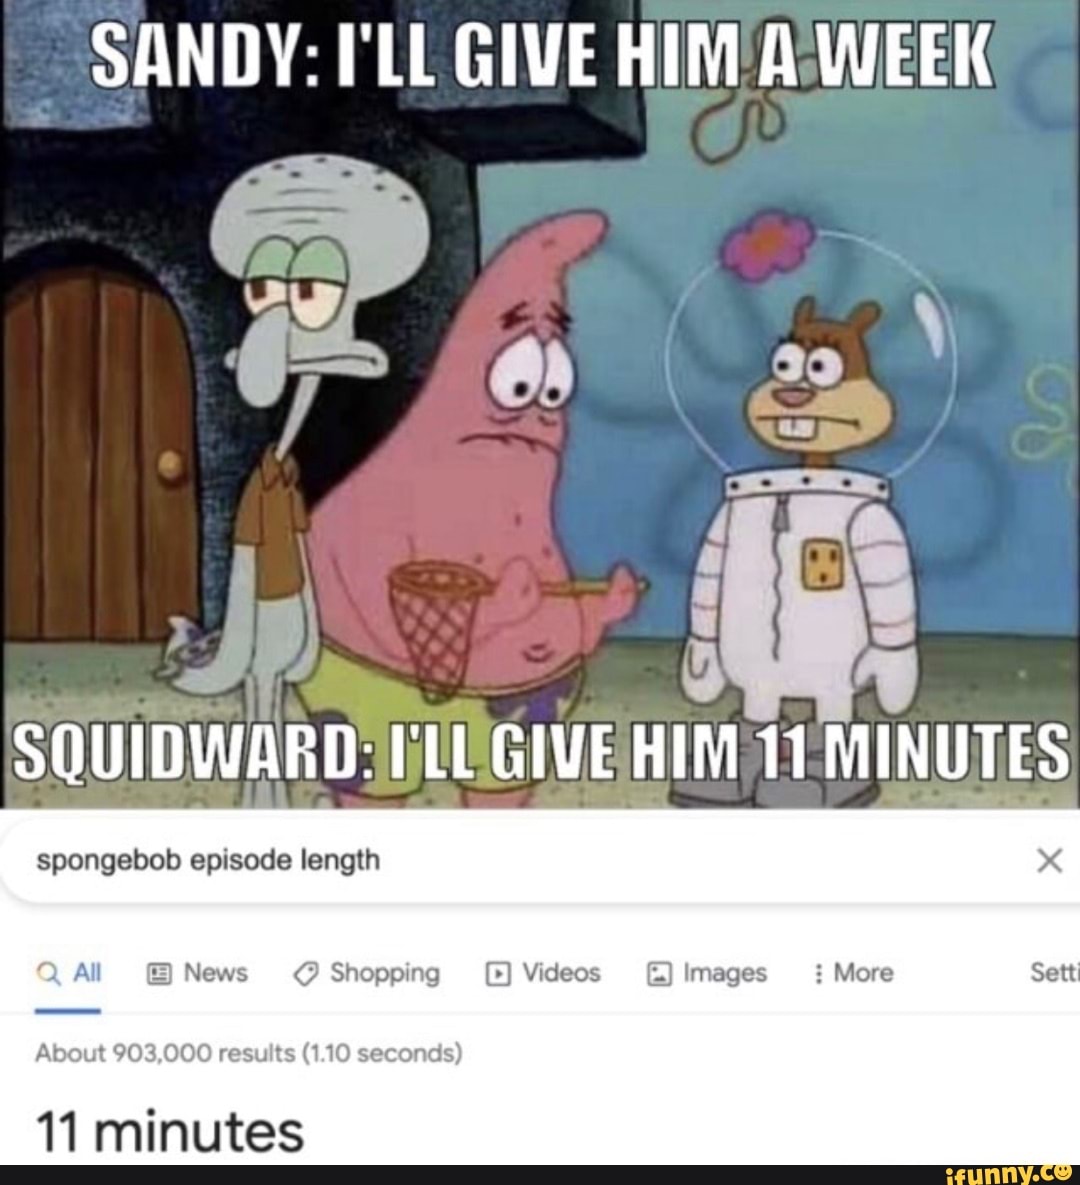 Sandy Ill Give Him Week Spongebob Episode Length Squidward Give Him 11 Minutes All News 